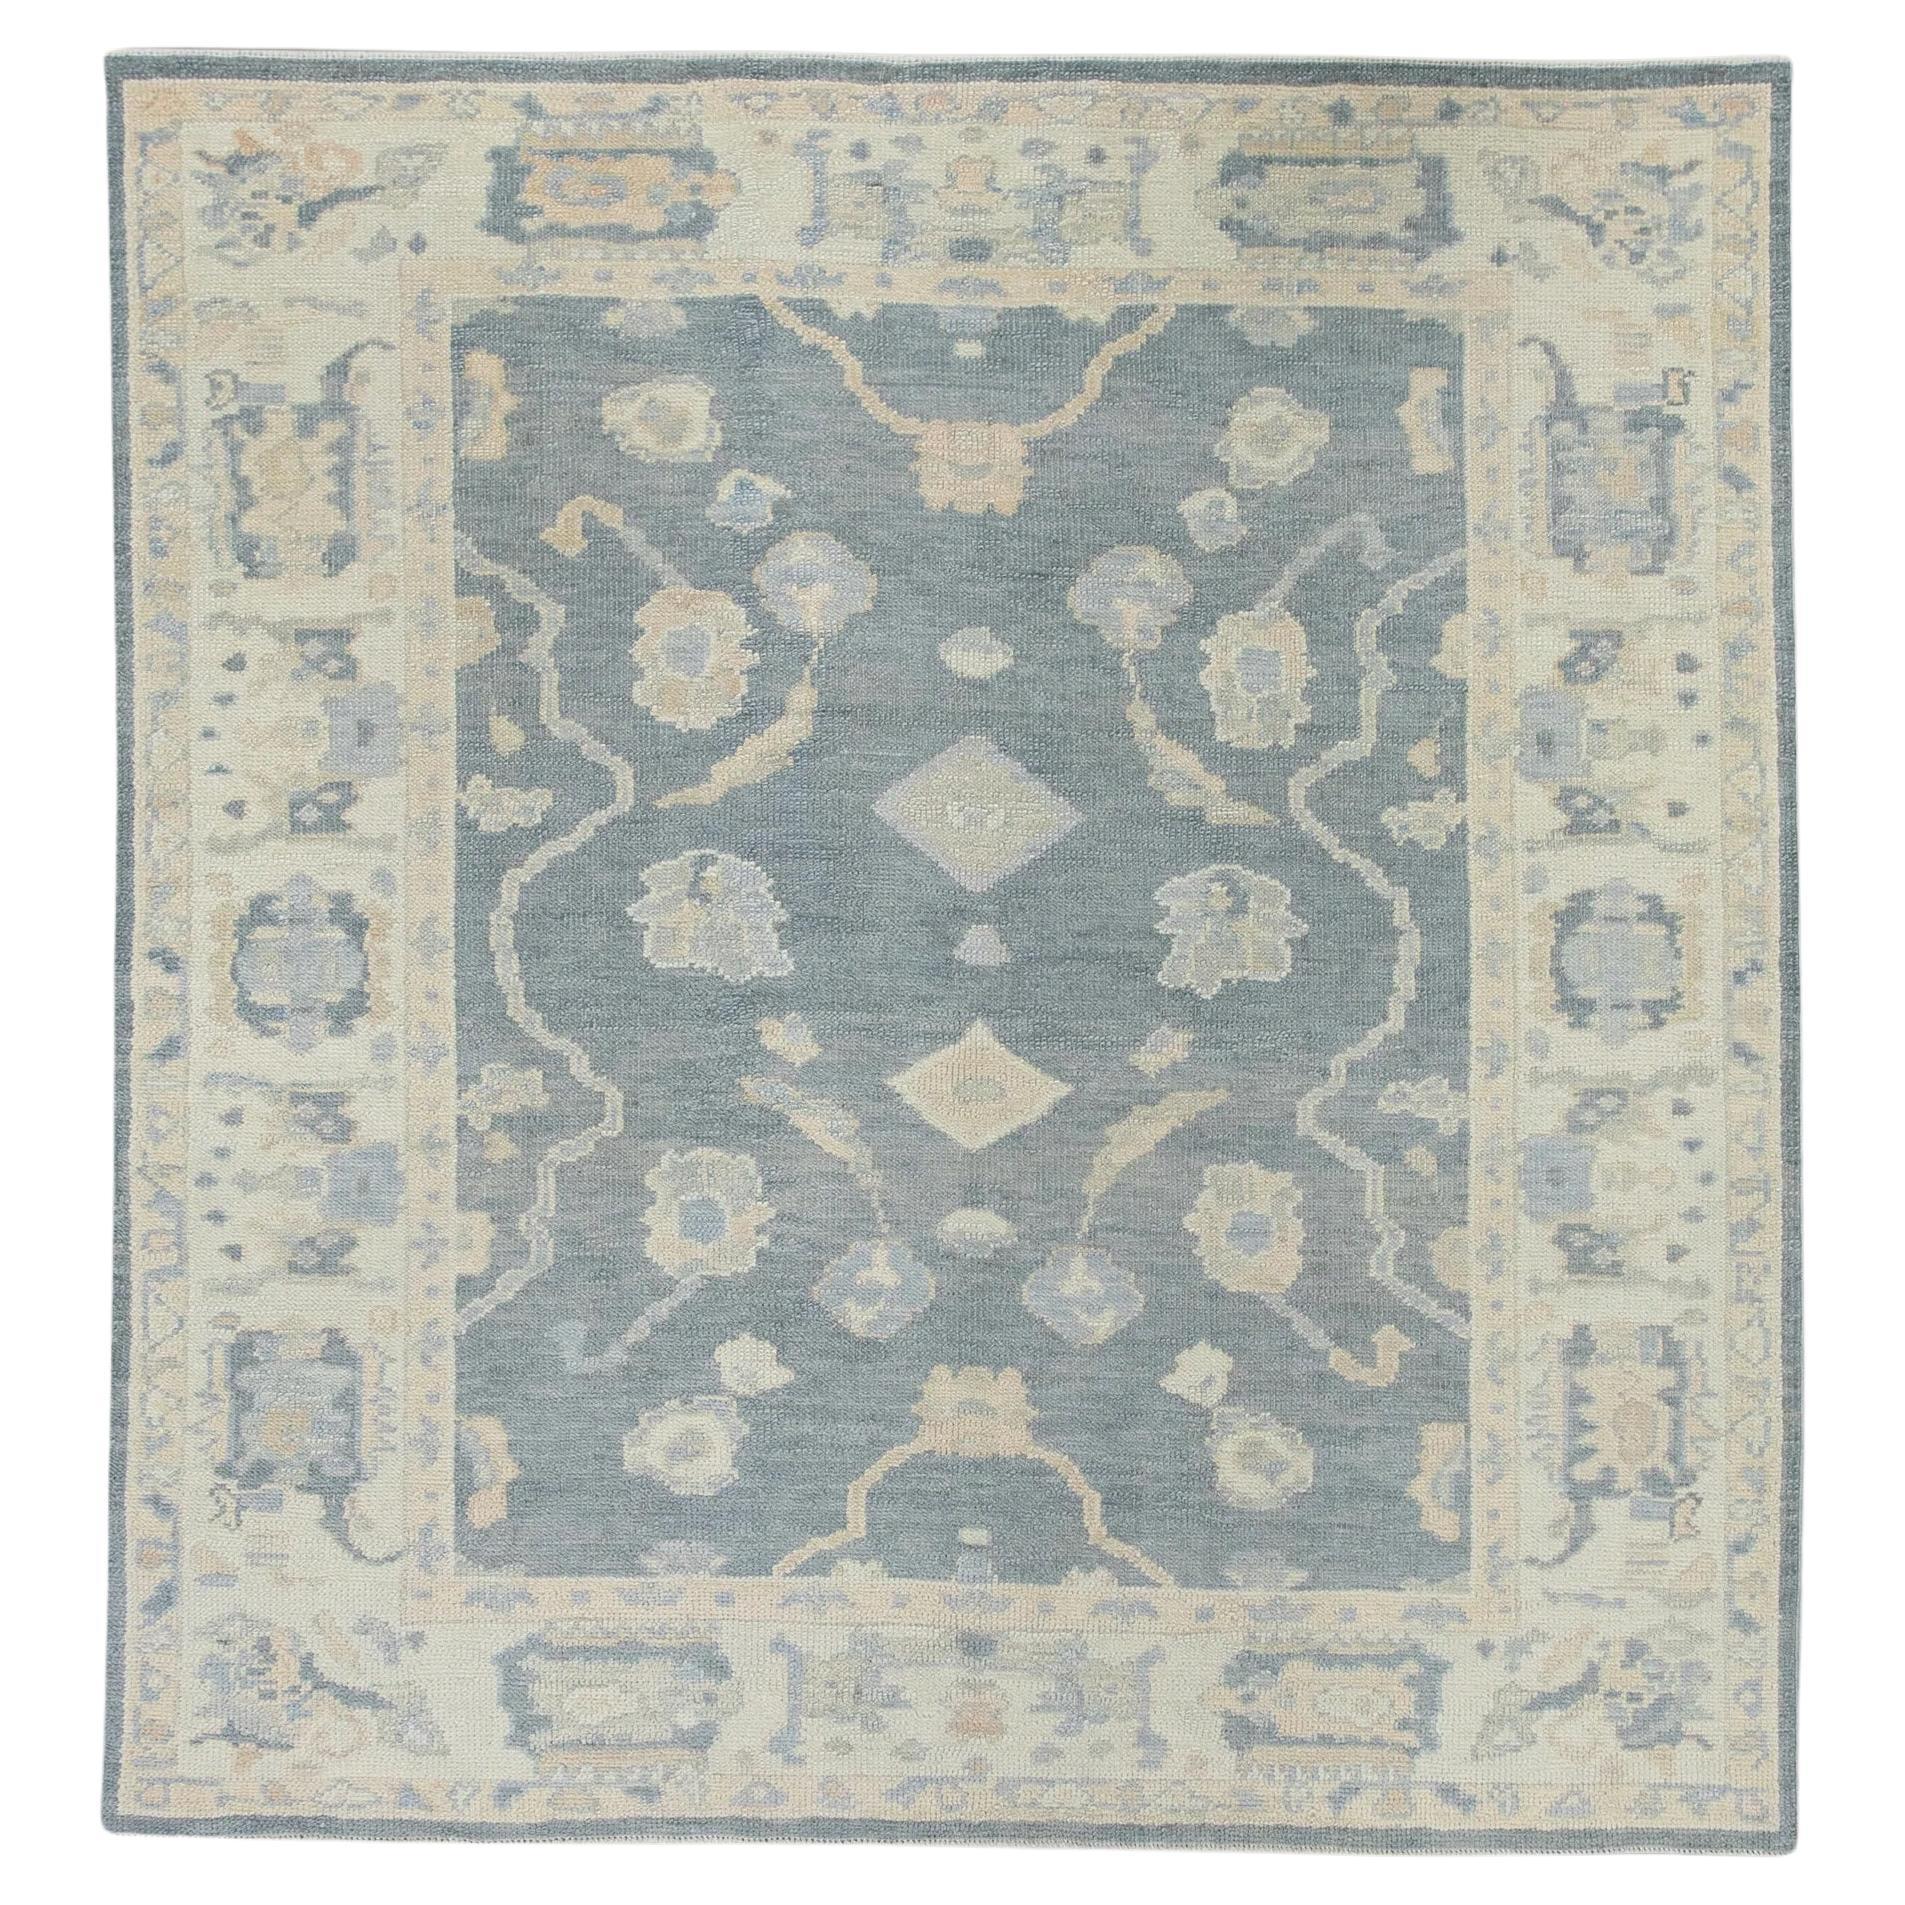 Gray Multicolor Handwoven Wool Floral Turkish Oushak Rug 5'7" x 5'11"